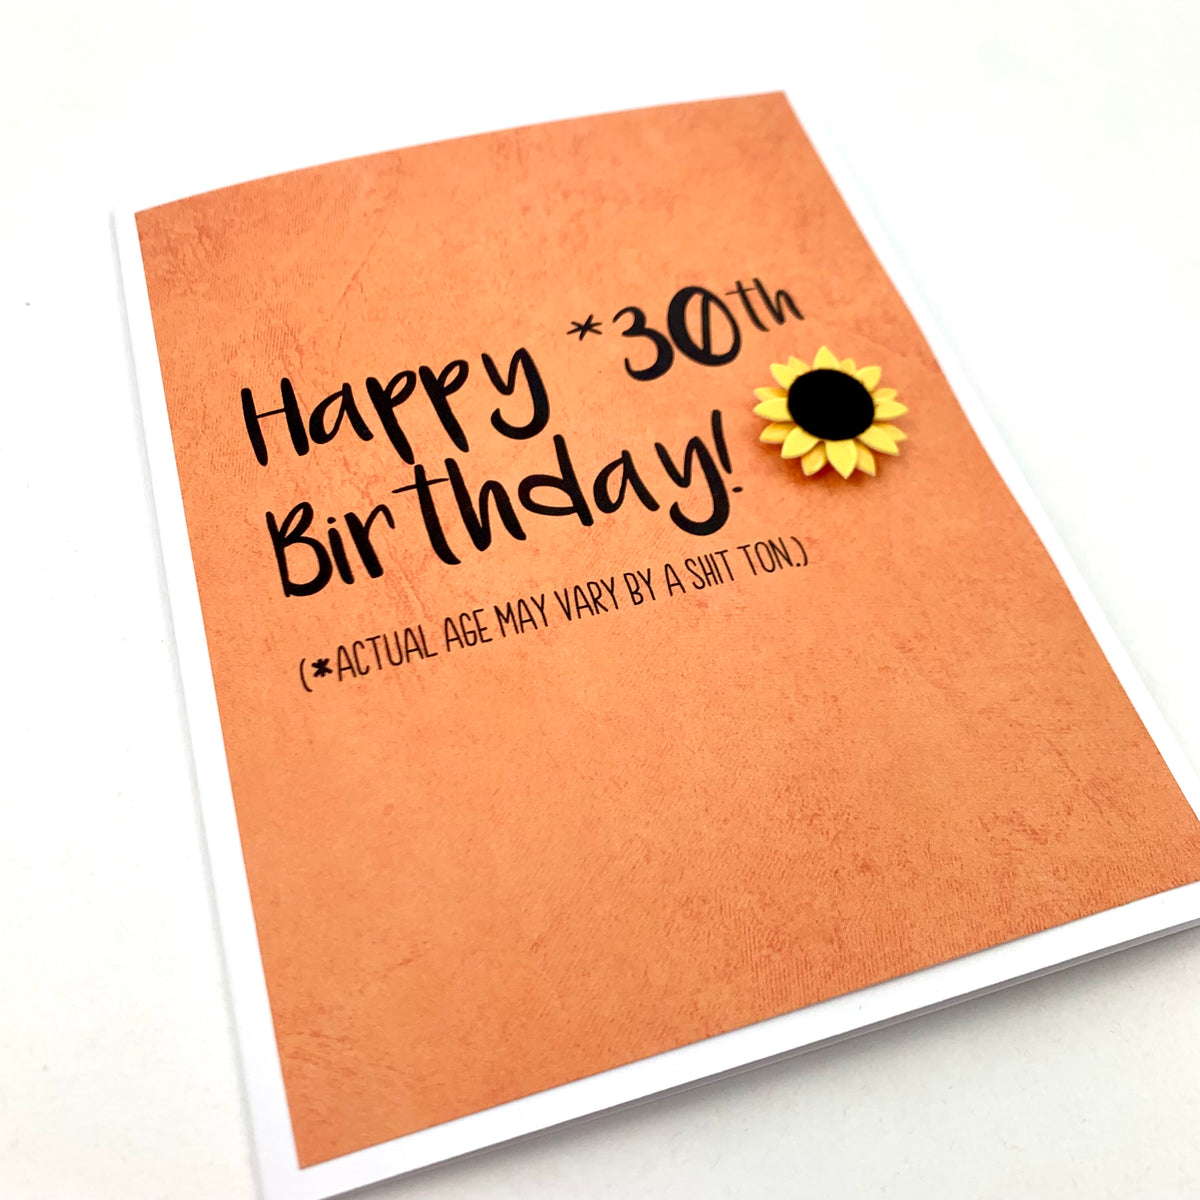 Birthday Age May Vary By a Shit Ton card